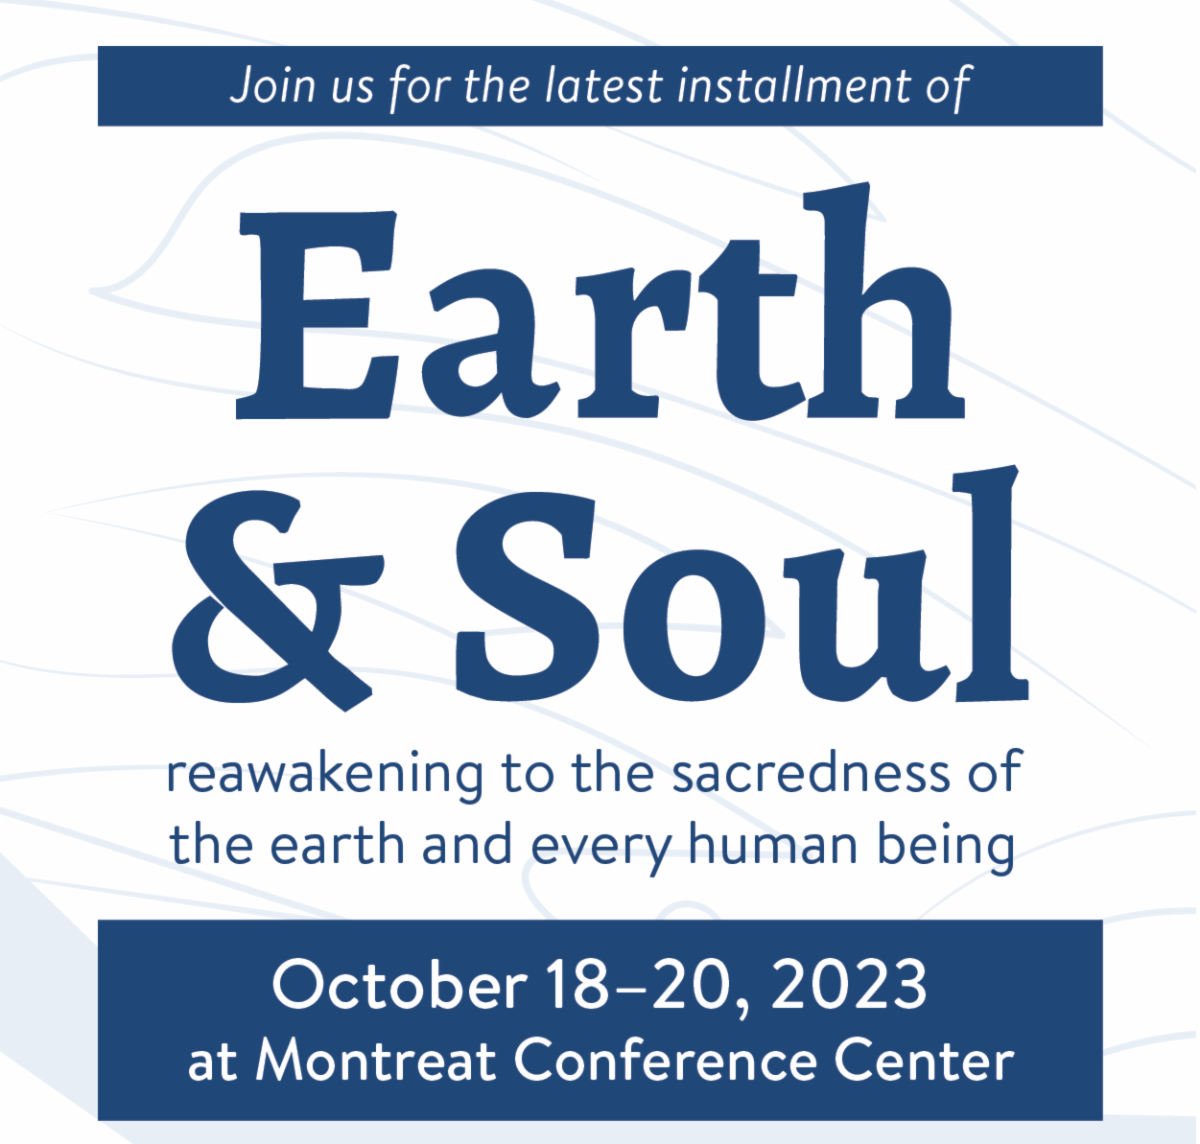 Join us for the latest installment of Earth and Soul: reawakening to the sacredness of the earth and every human being. October 18-20, 2023, at Montreat Conference Center.